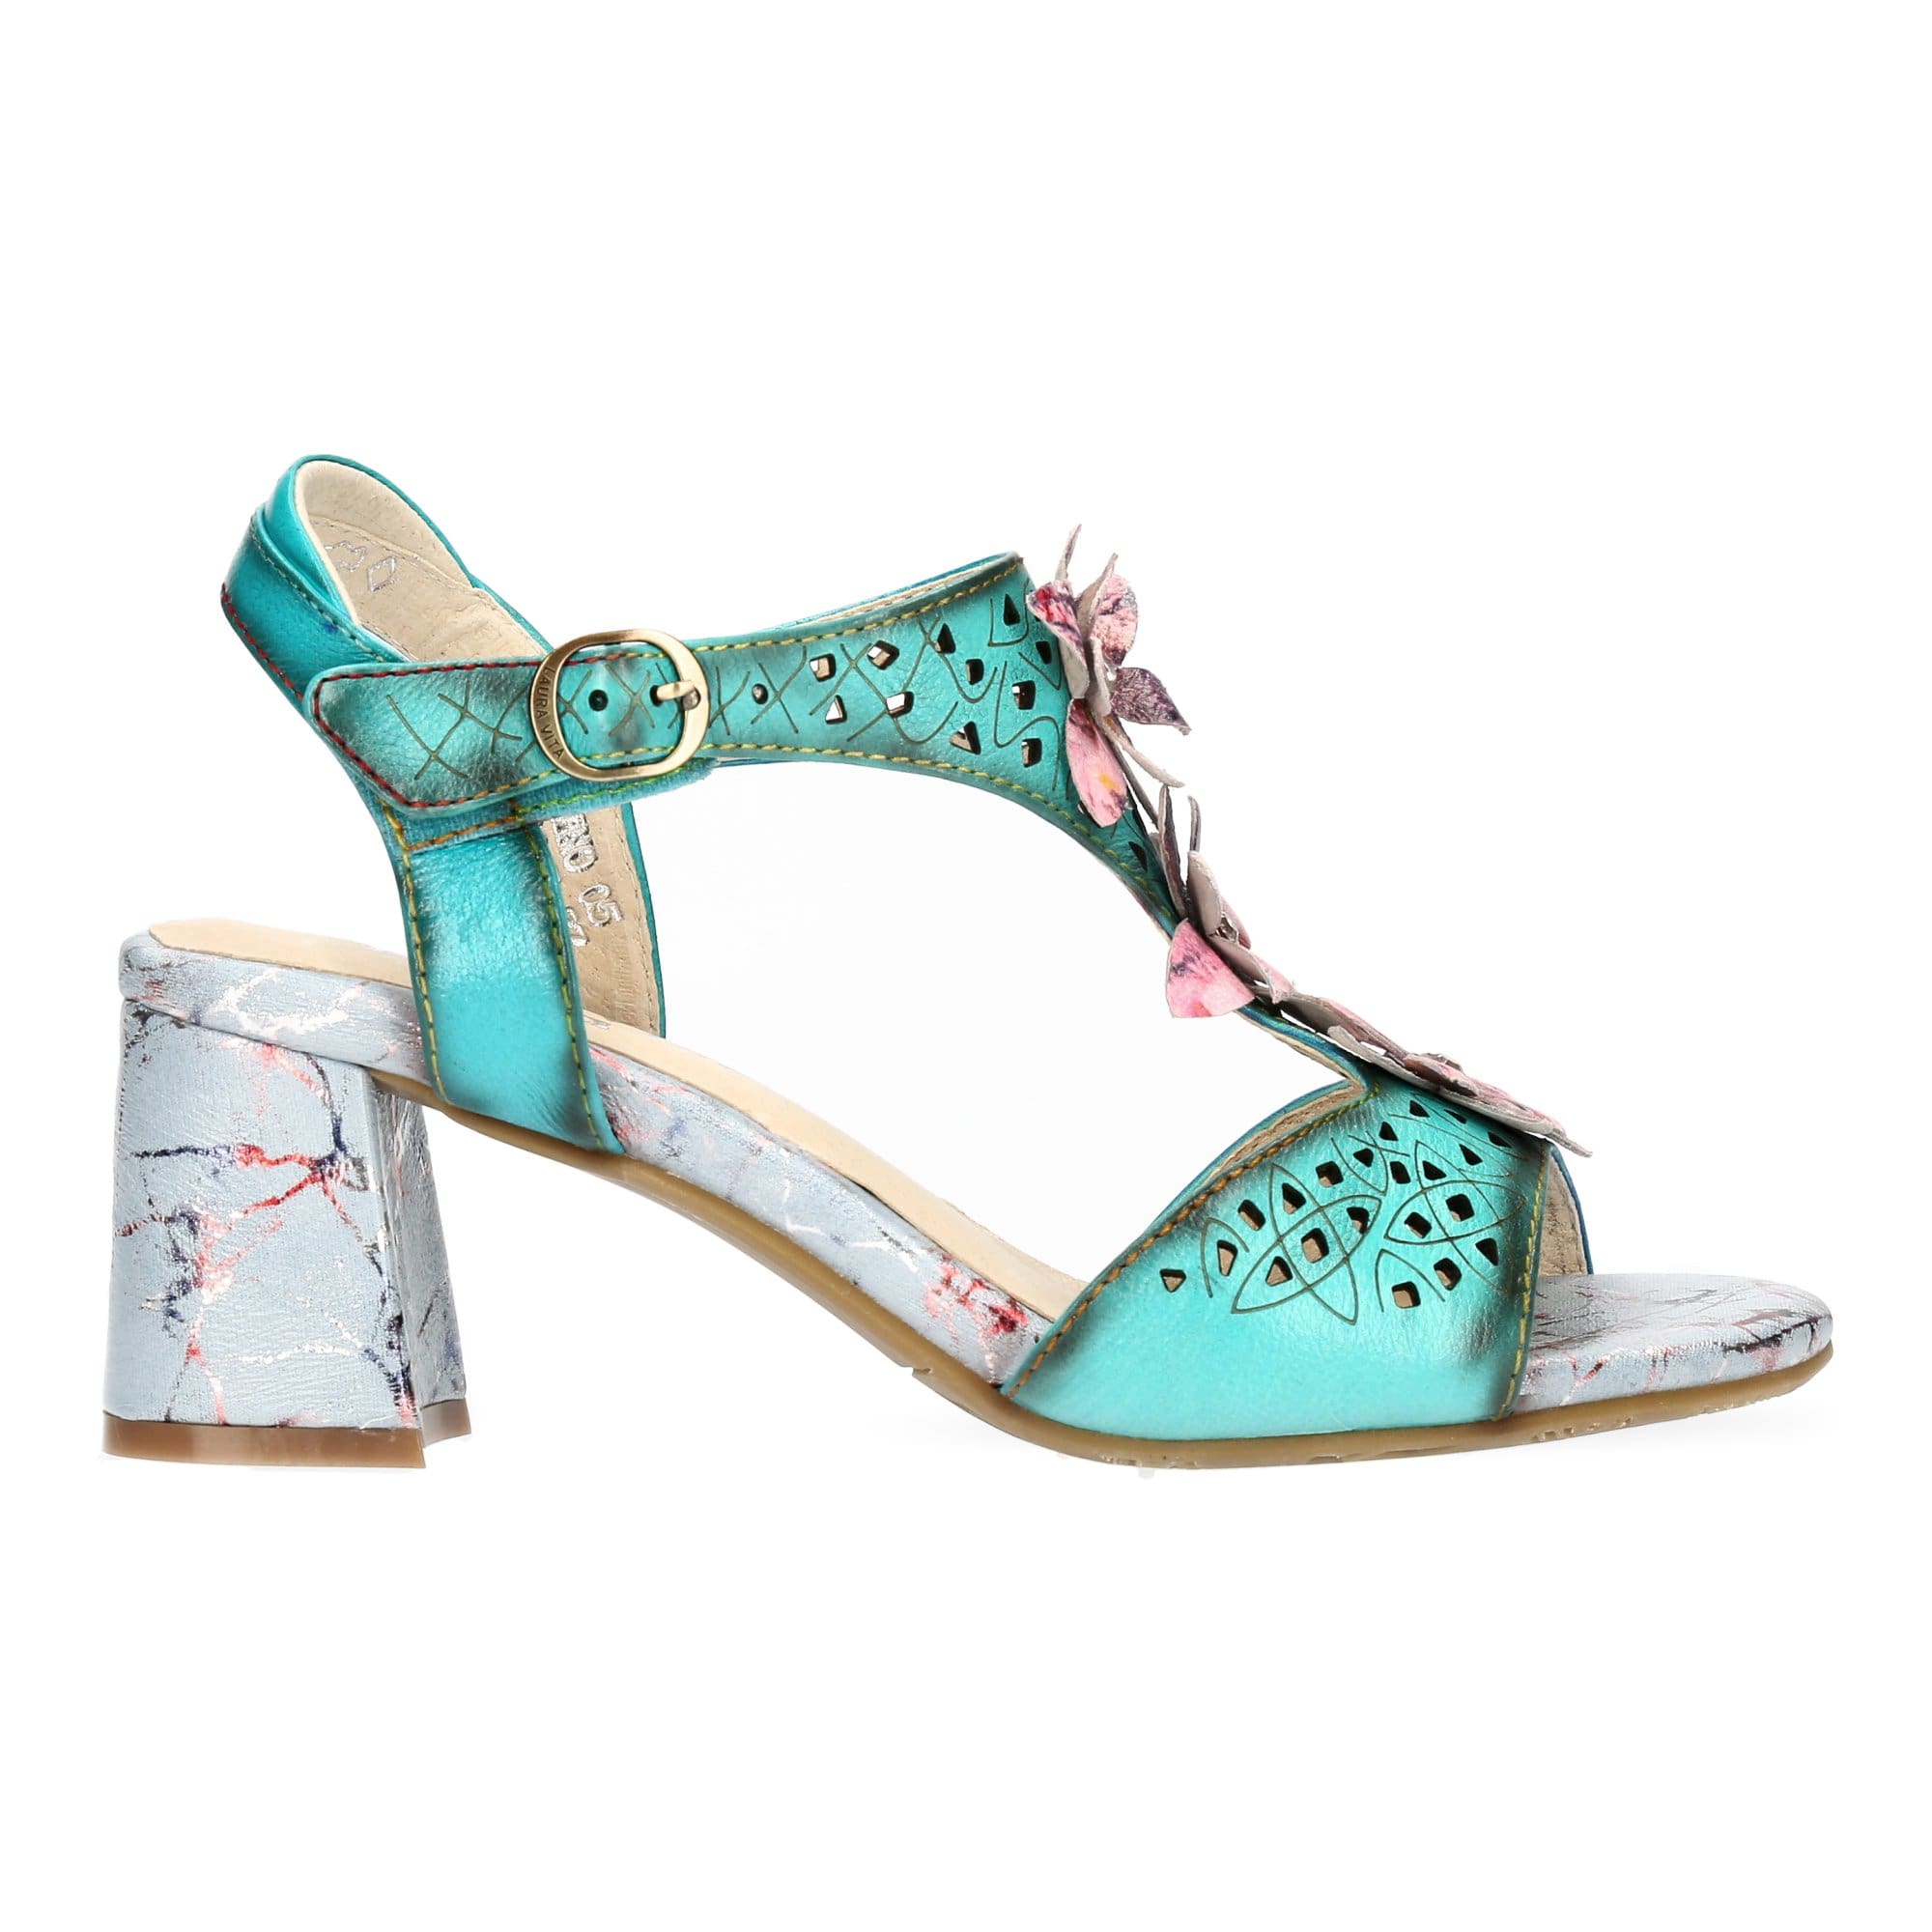 Chaussures JACHINO 05 - 35 / Turquoise - Sandale